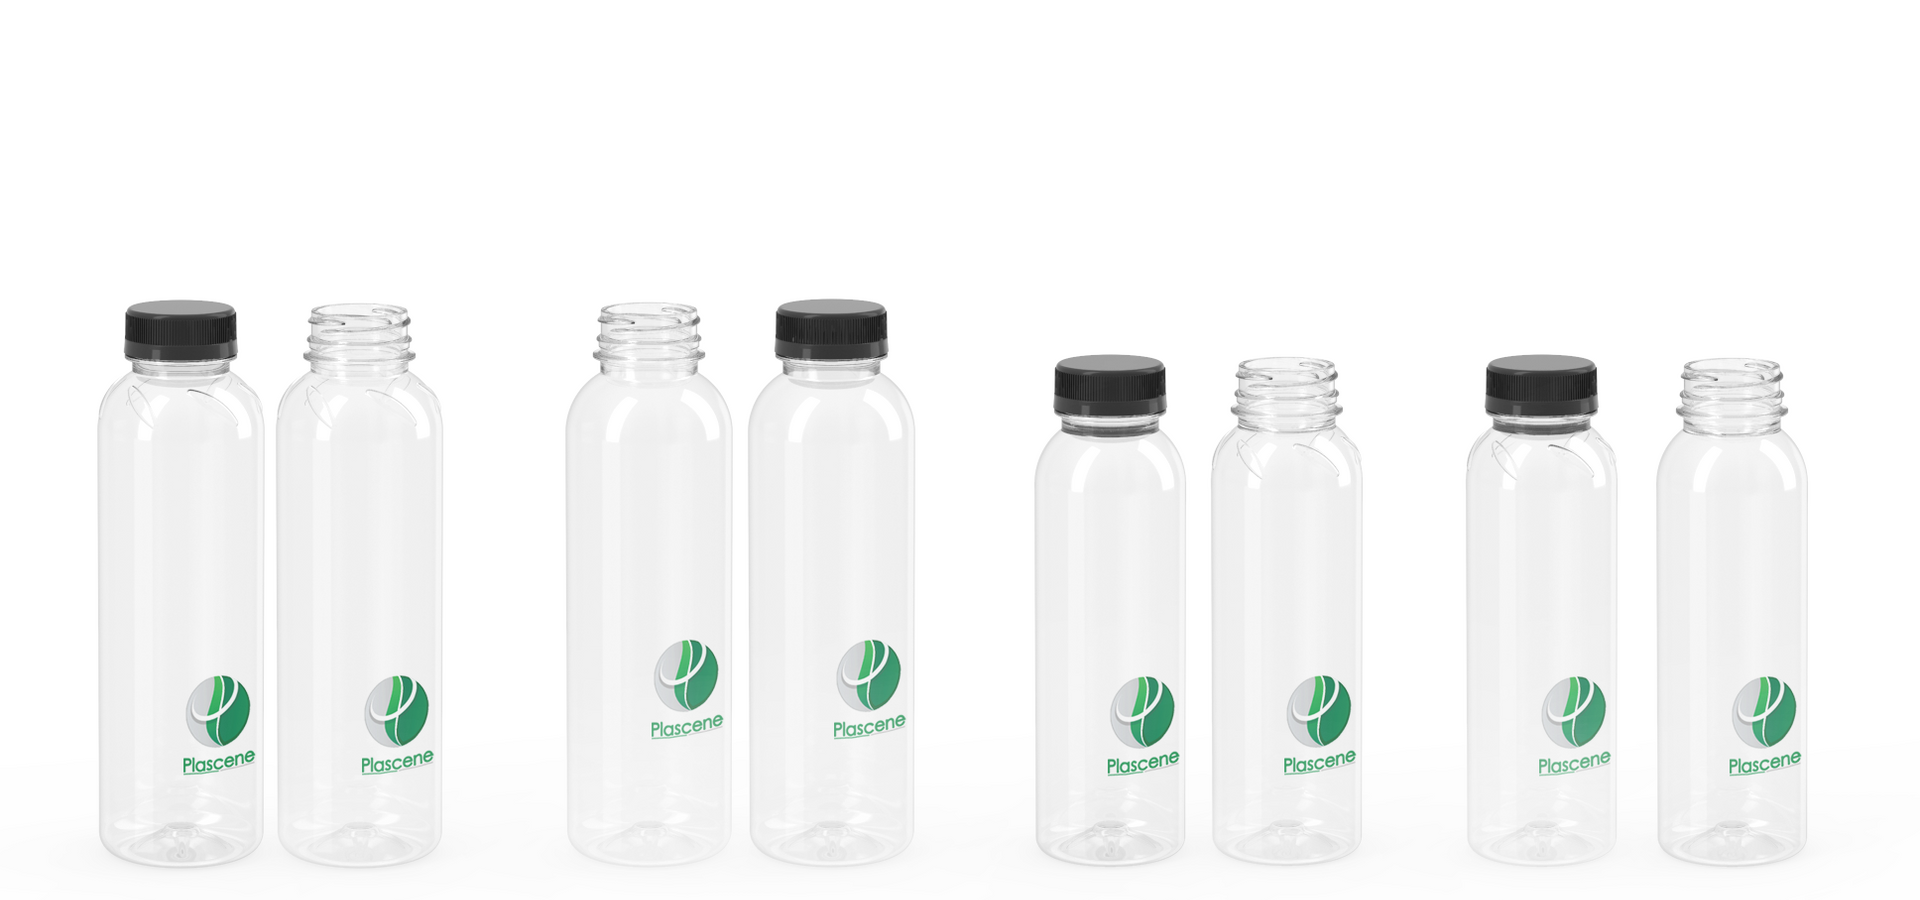 A row of clear plastic bottles with green logos on them.